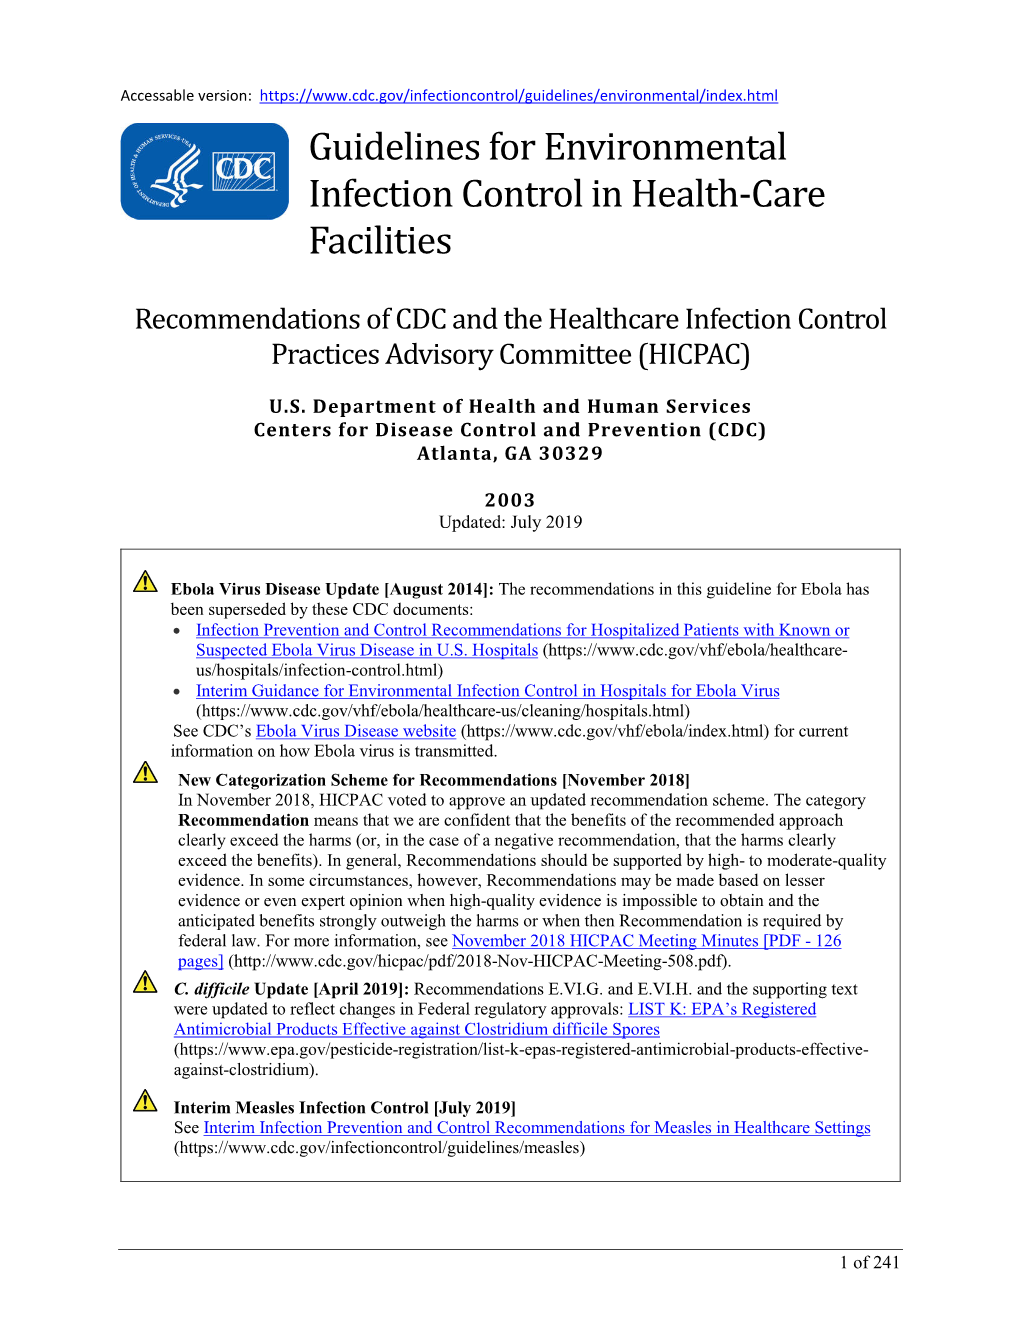 Guidelines for Environmental Infection Control in Health-Care Facilities